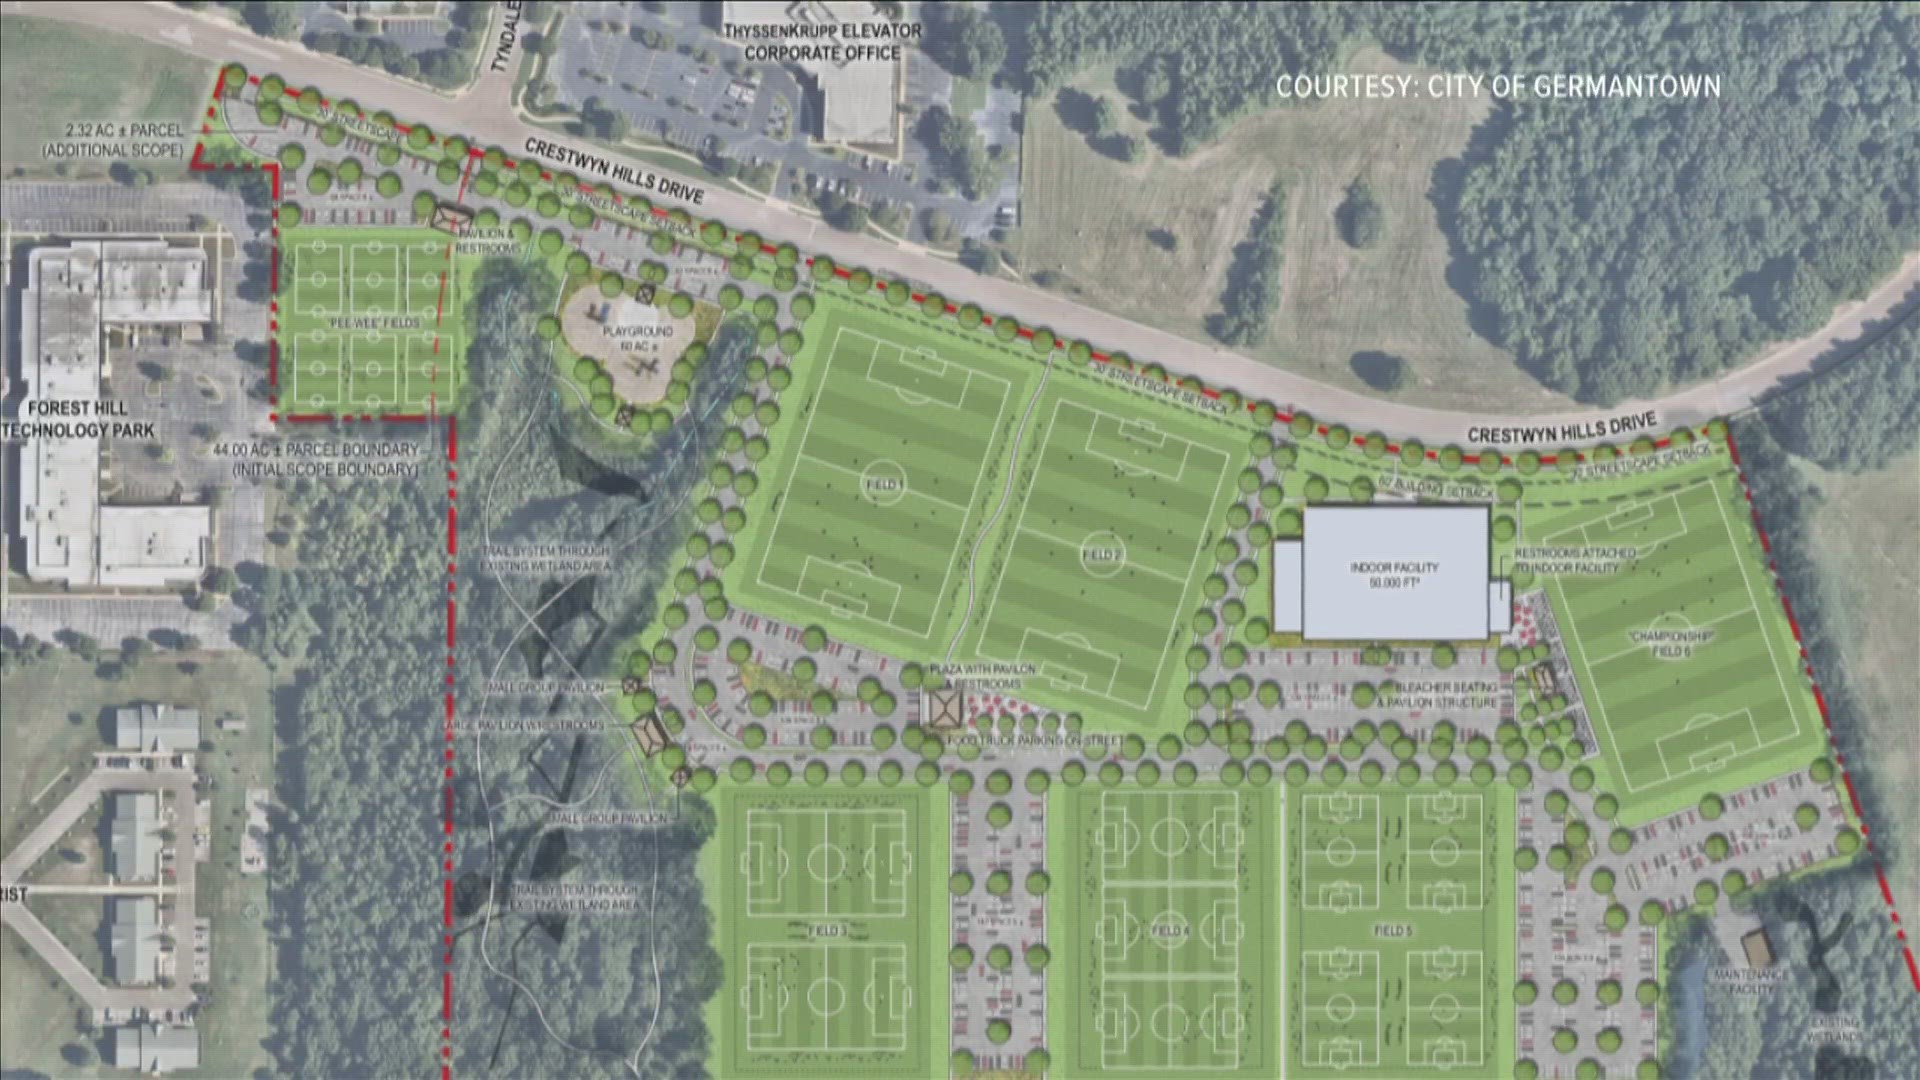 City officials said they want the complex to support multiple sports, such as soccer, baseball, football, lacrosse and rugby.